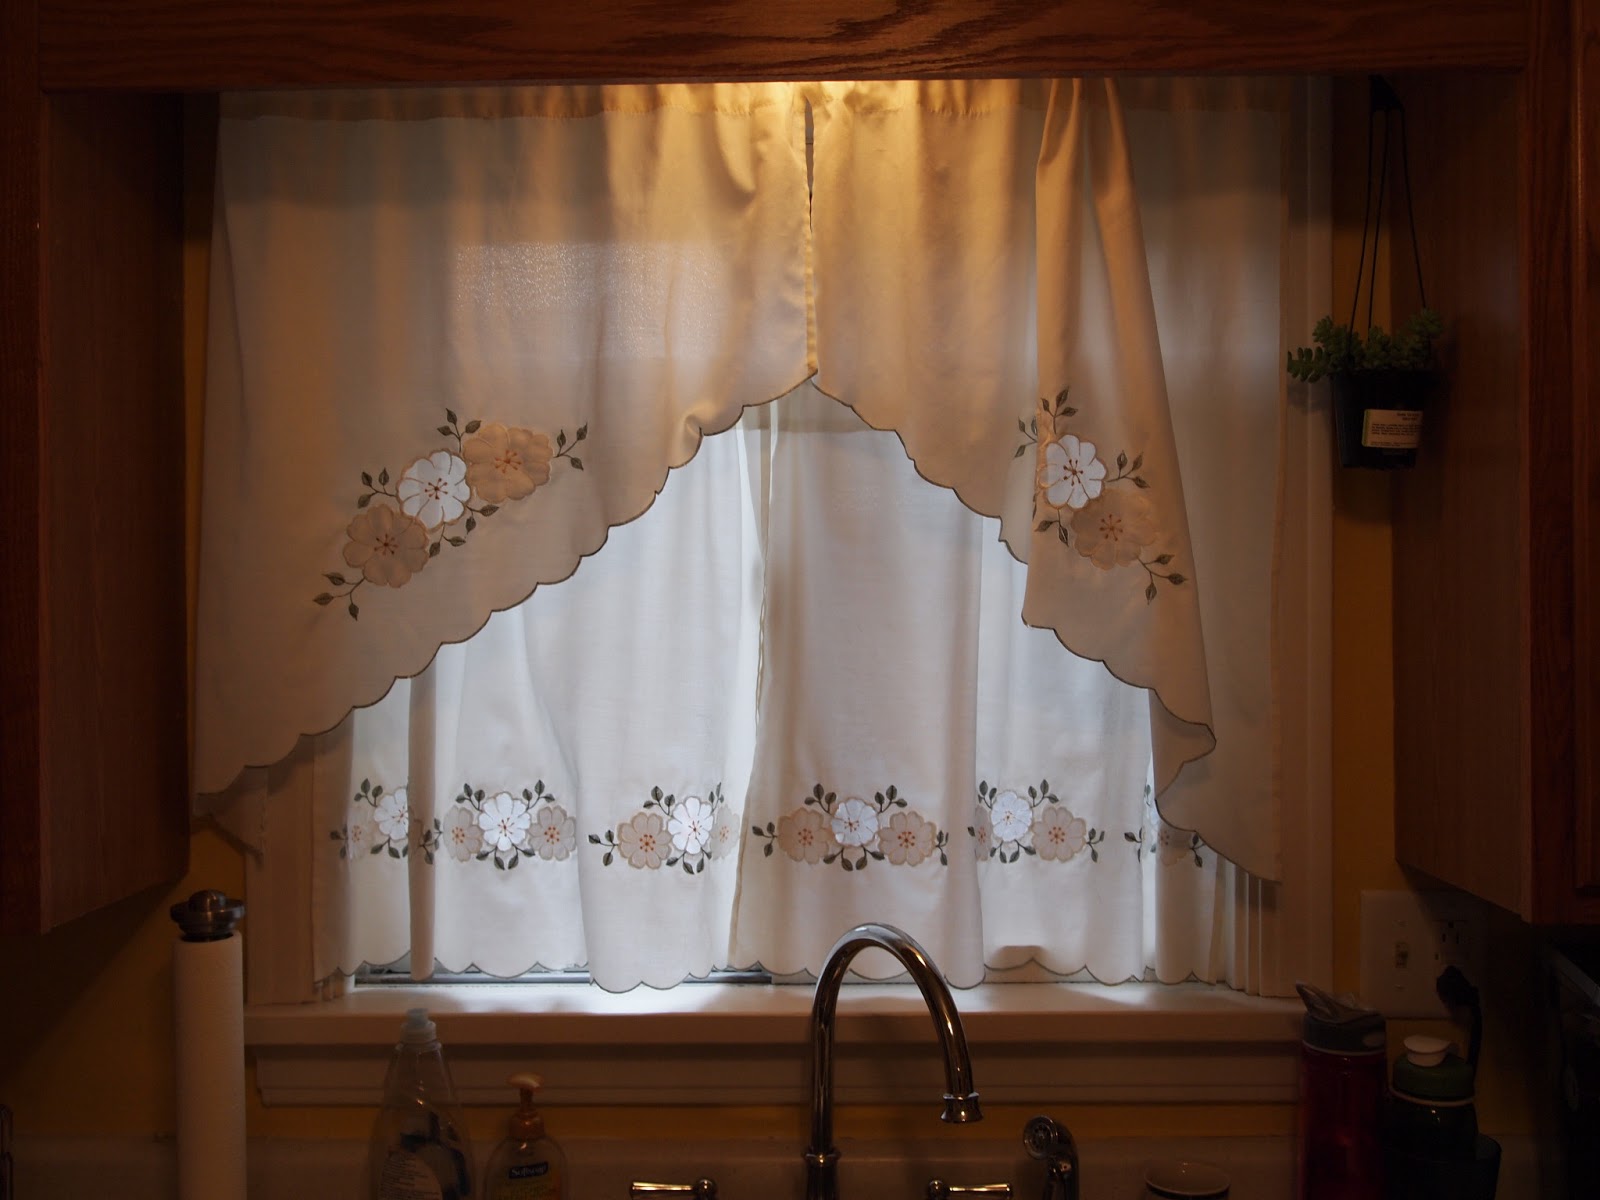 What Are Kitchen Curtains Called